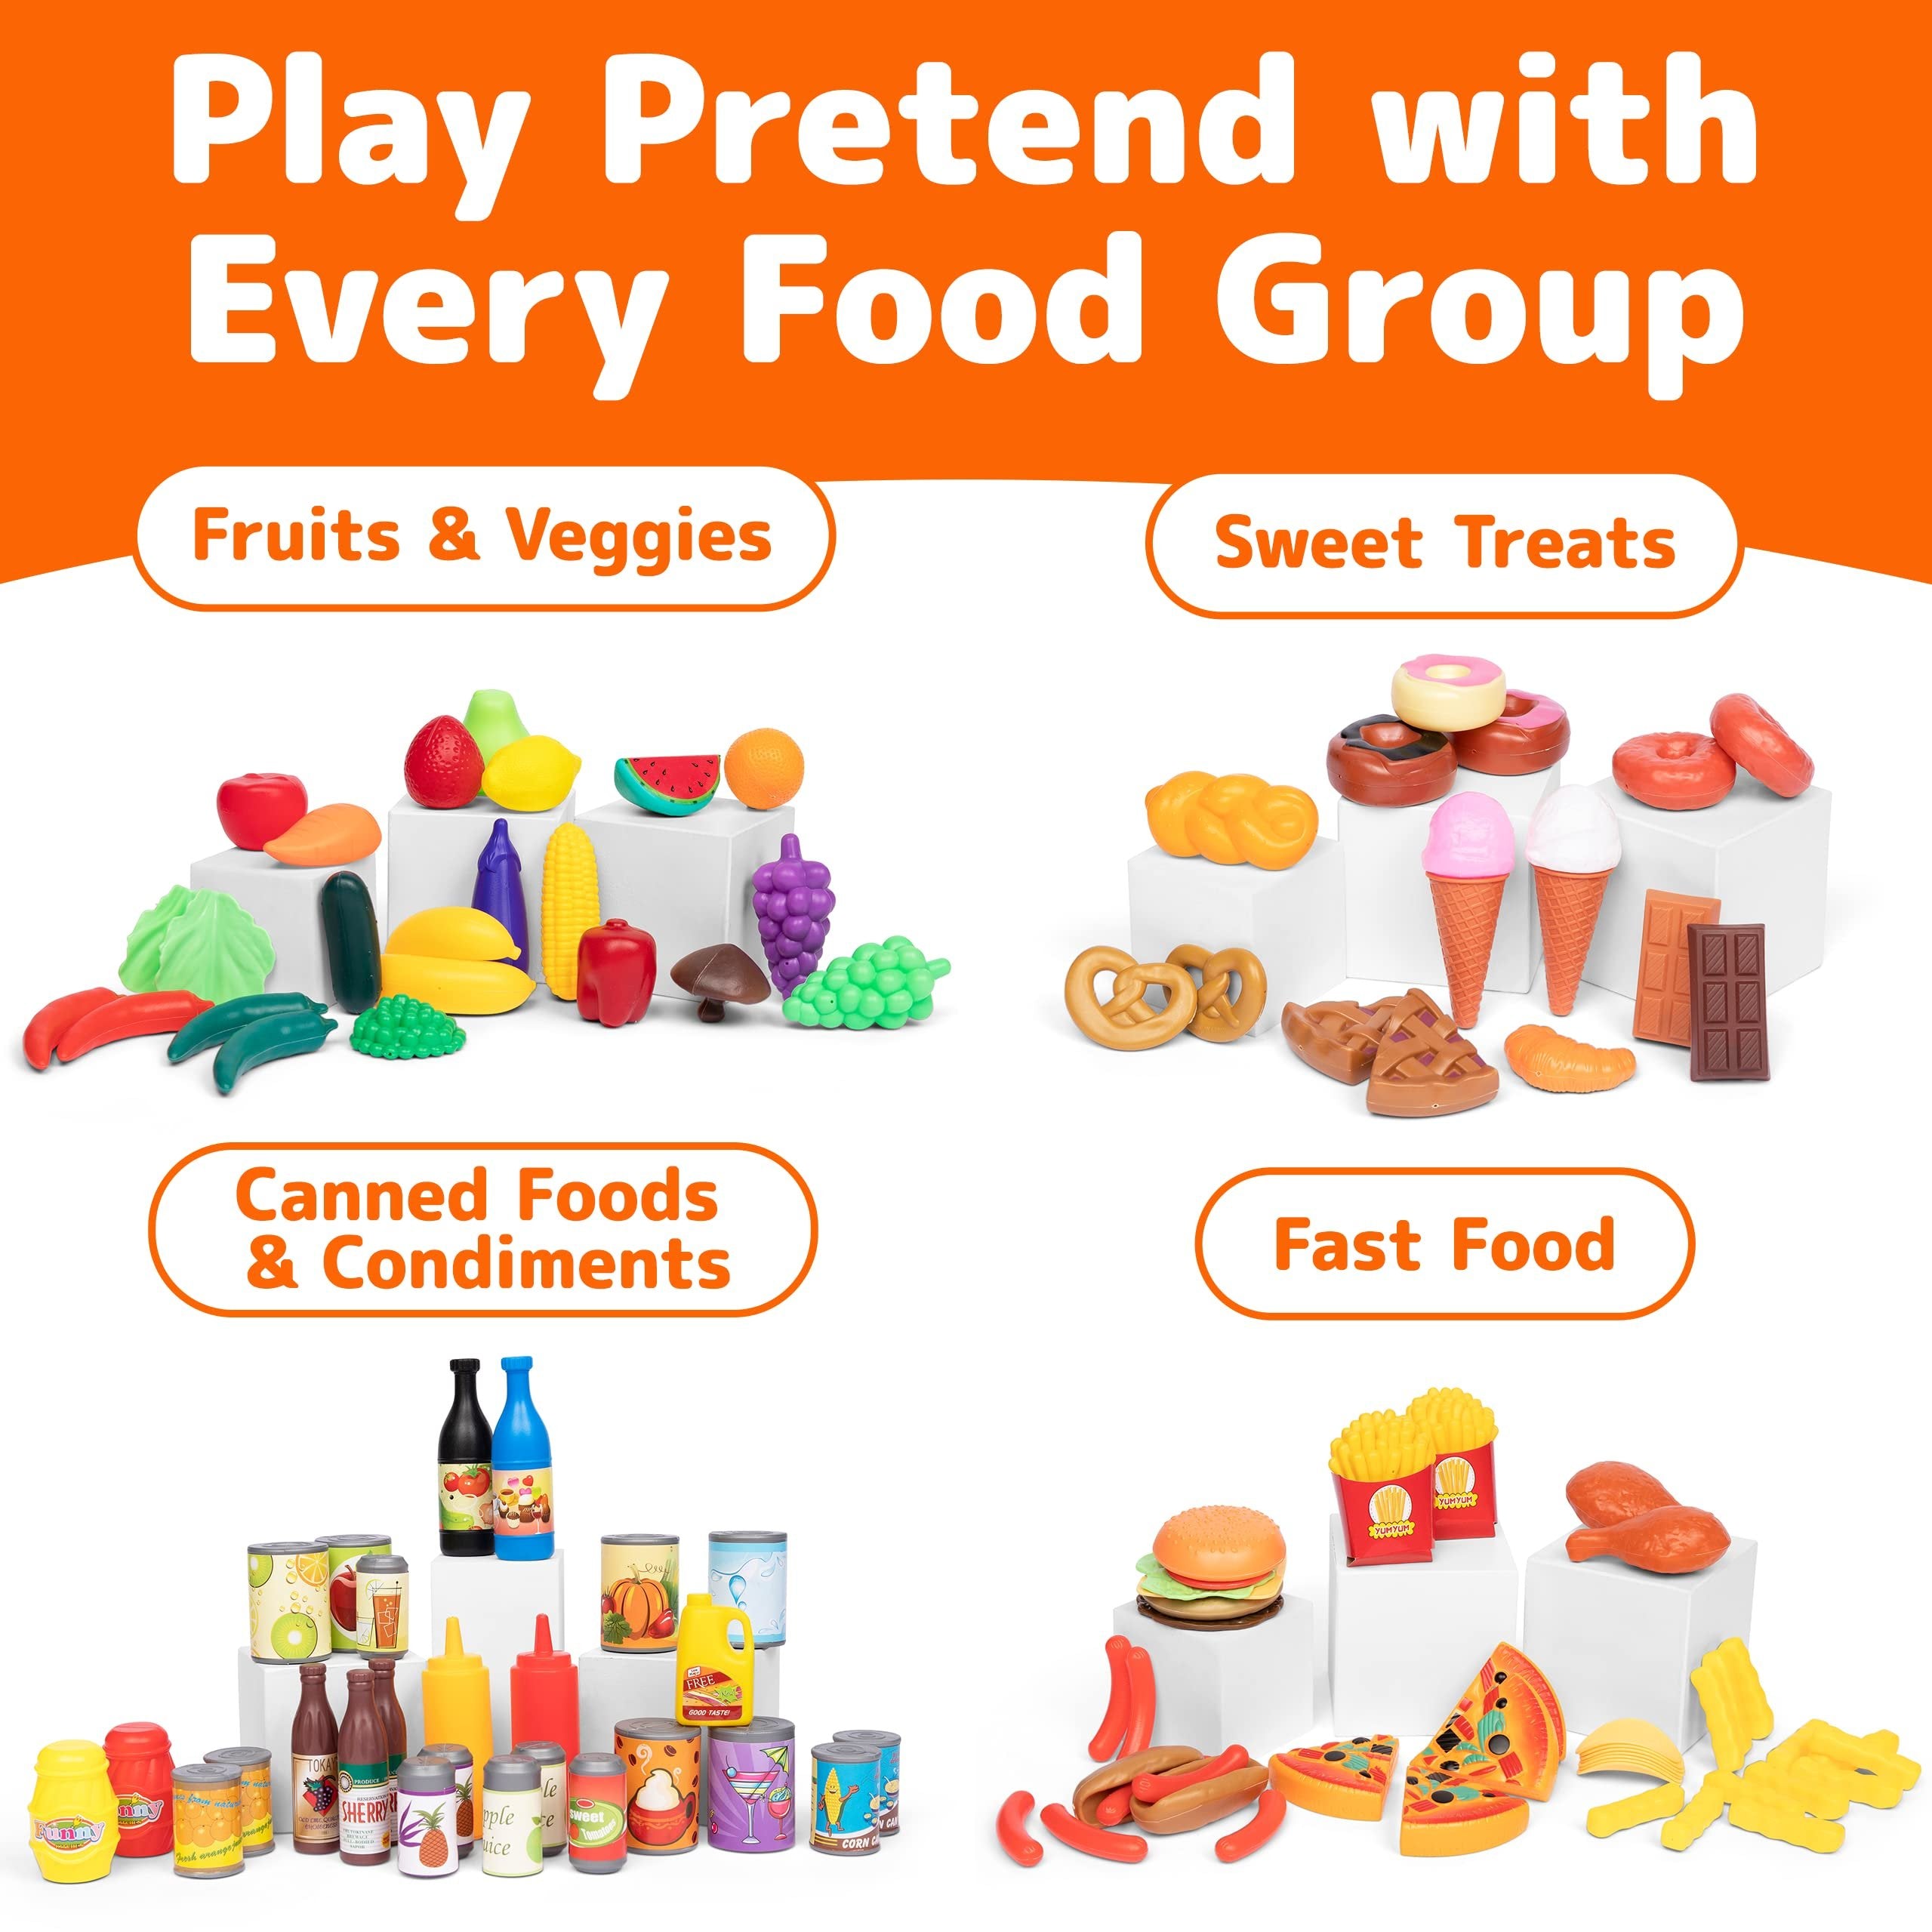 JaxoJoy Pretend Play Food Set for Ages 3+ (122pcs) - Toy Food Assortment Playset for Kids&Toddlers, Mini Kitchen Food Sets, Kitchen Toys, Fake Food, Imaginative Play Kitchen Accessories, Gift for Kids